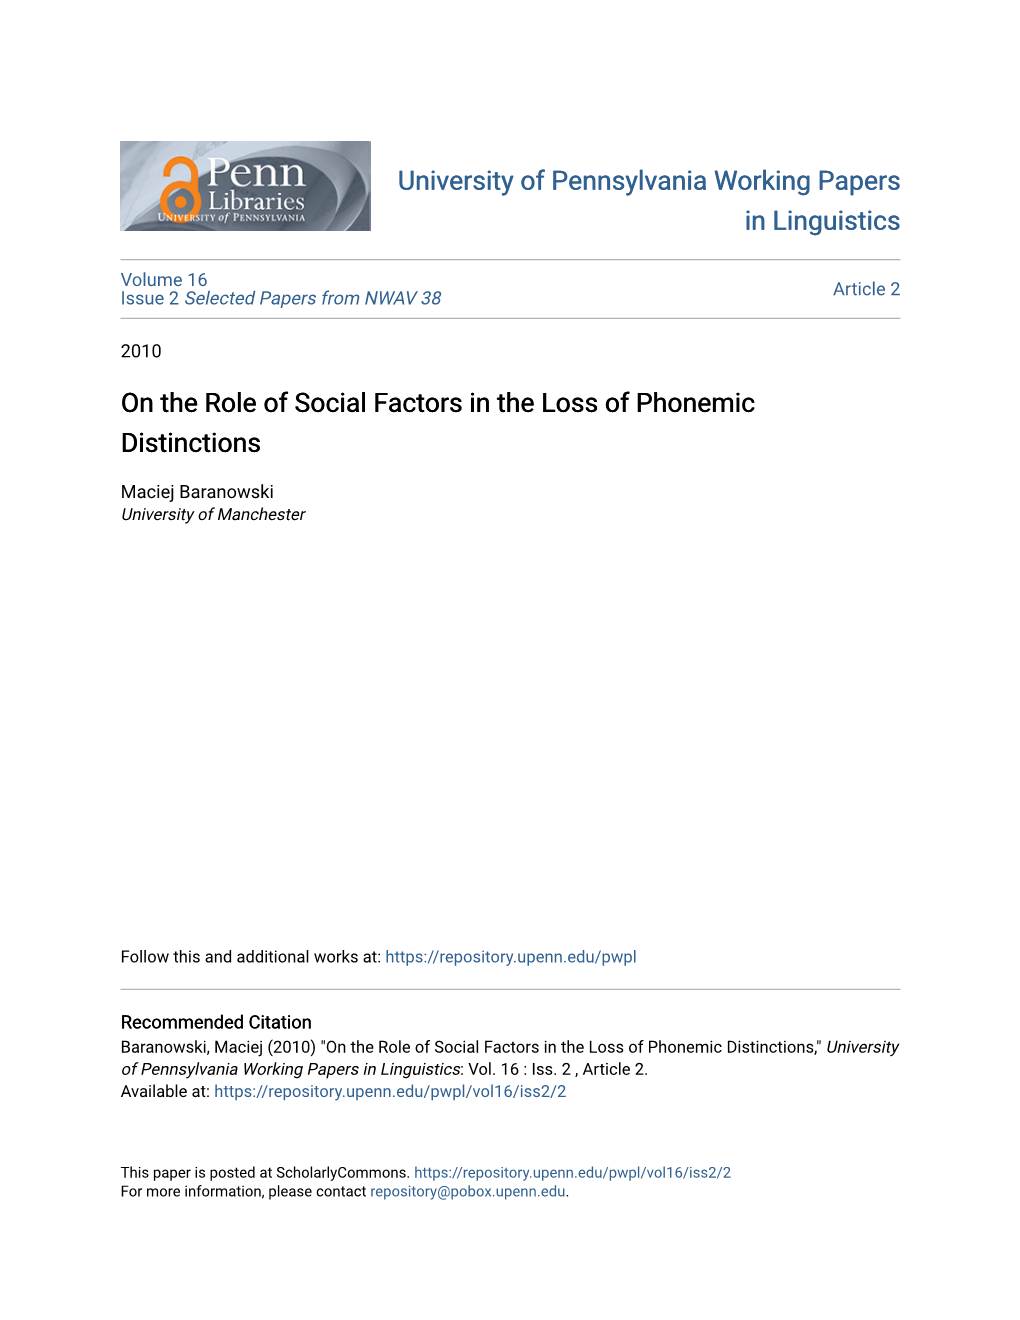 On the Role of Social Factors in the Loss of Phonemic Distinctions